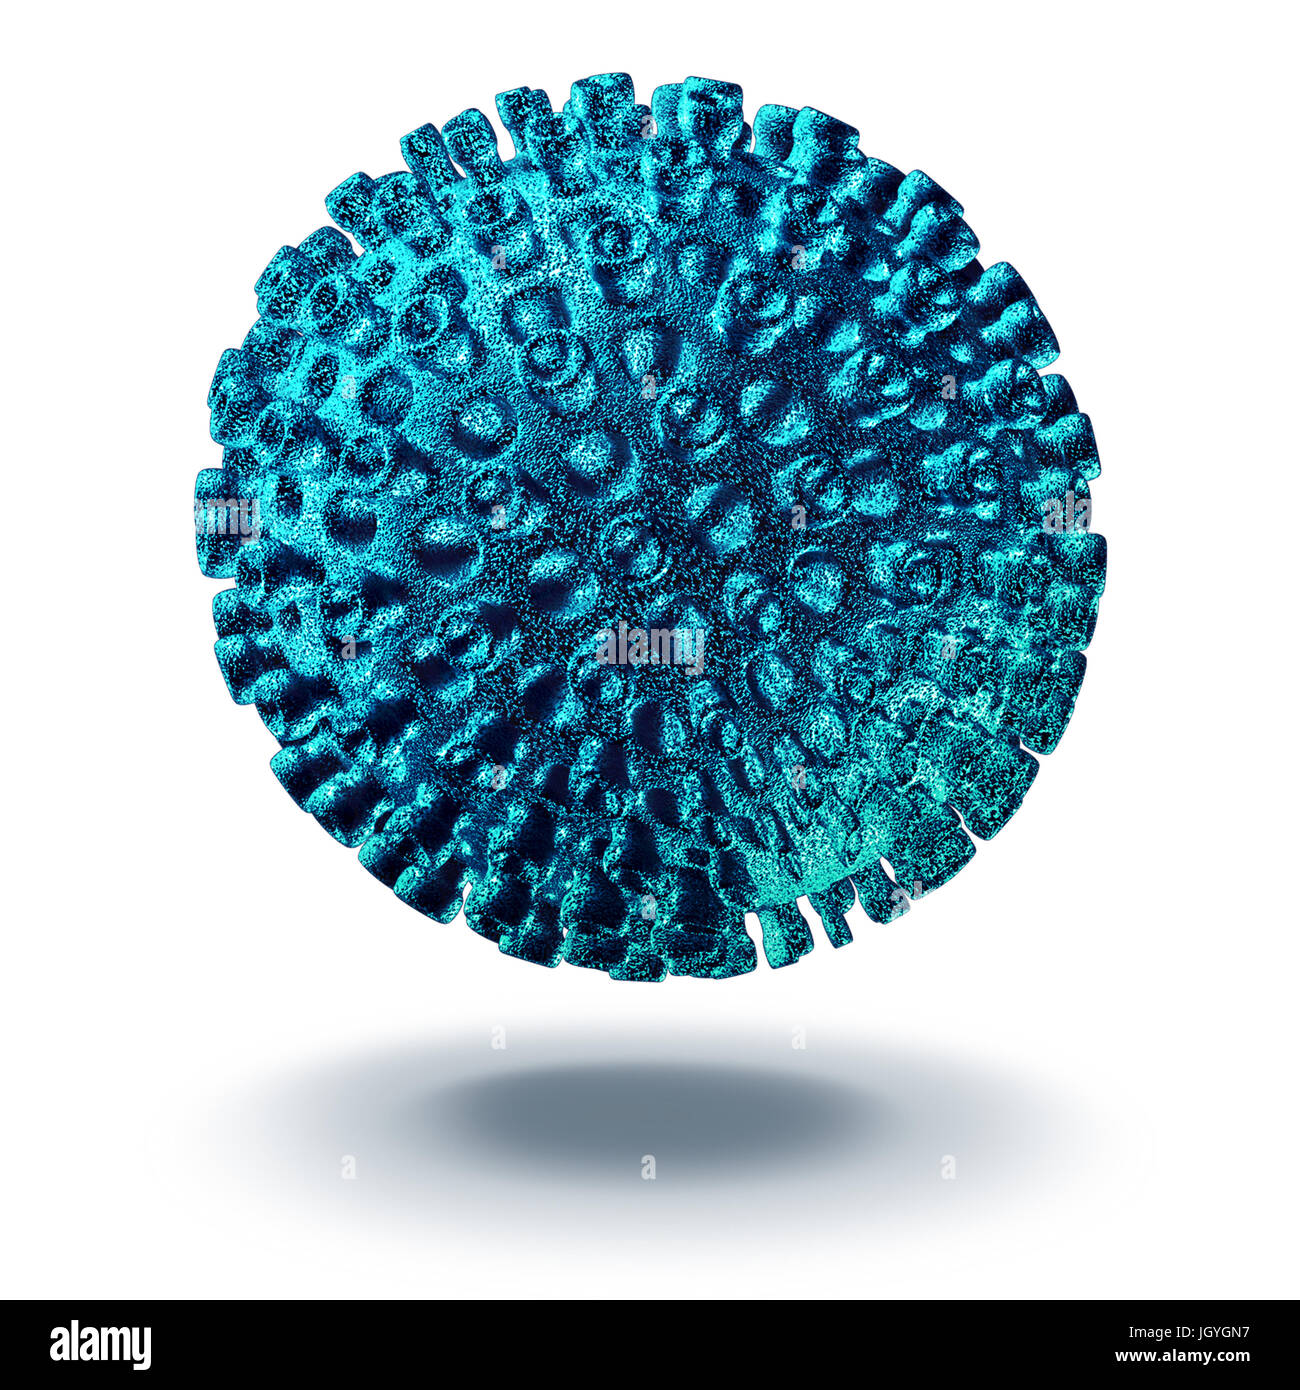 Hepatitis virus cell disease concept as a three dimensional illustration of a human illness pathogen as a medical symbol for a viral infection. Stock Photo